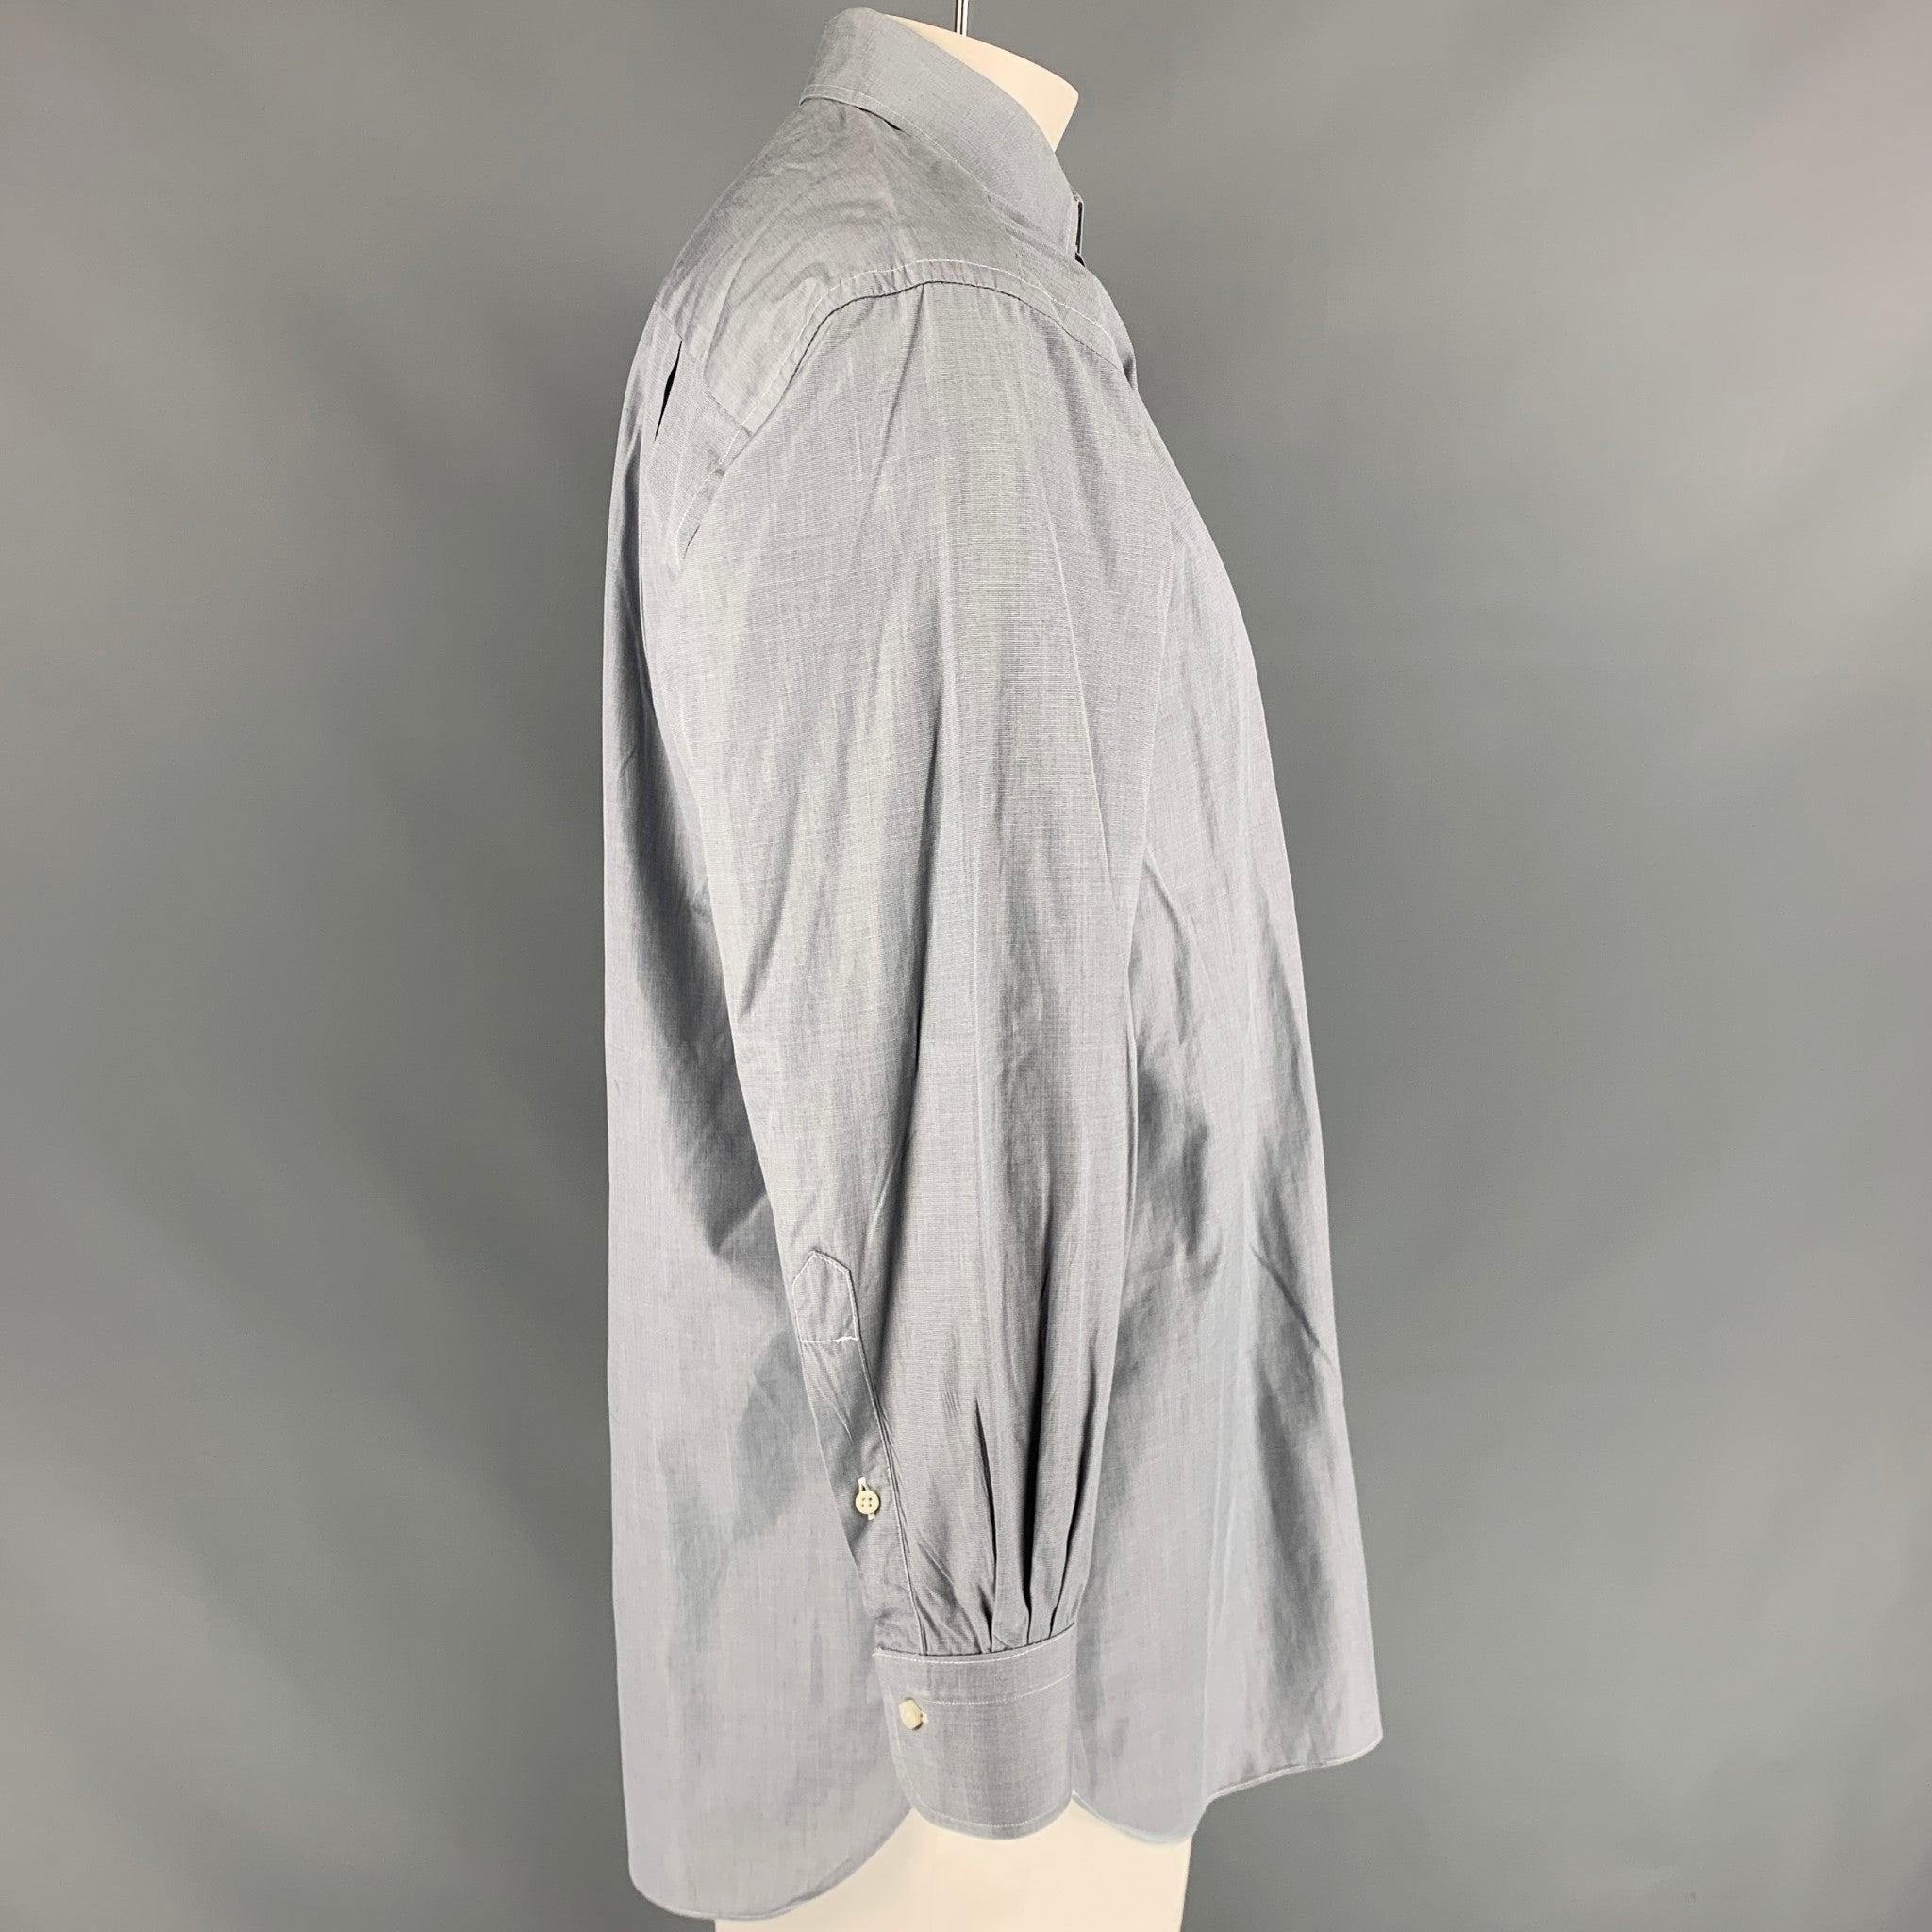 ERMENEGILDO ZEGNA 'Portofino Comfort' long sleeve shirt comes in grey cotton featuring a patch pocket at left front panel, spread collar, one button round cuff, and button up closure. Very Good Pre-Owned Condition. 

Marked:   43/17 

Measurements: